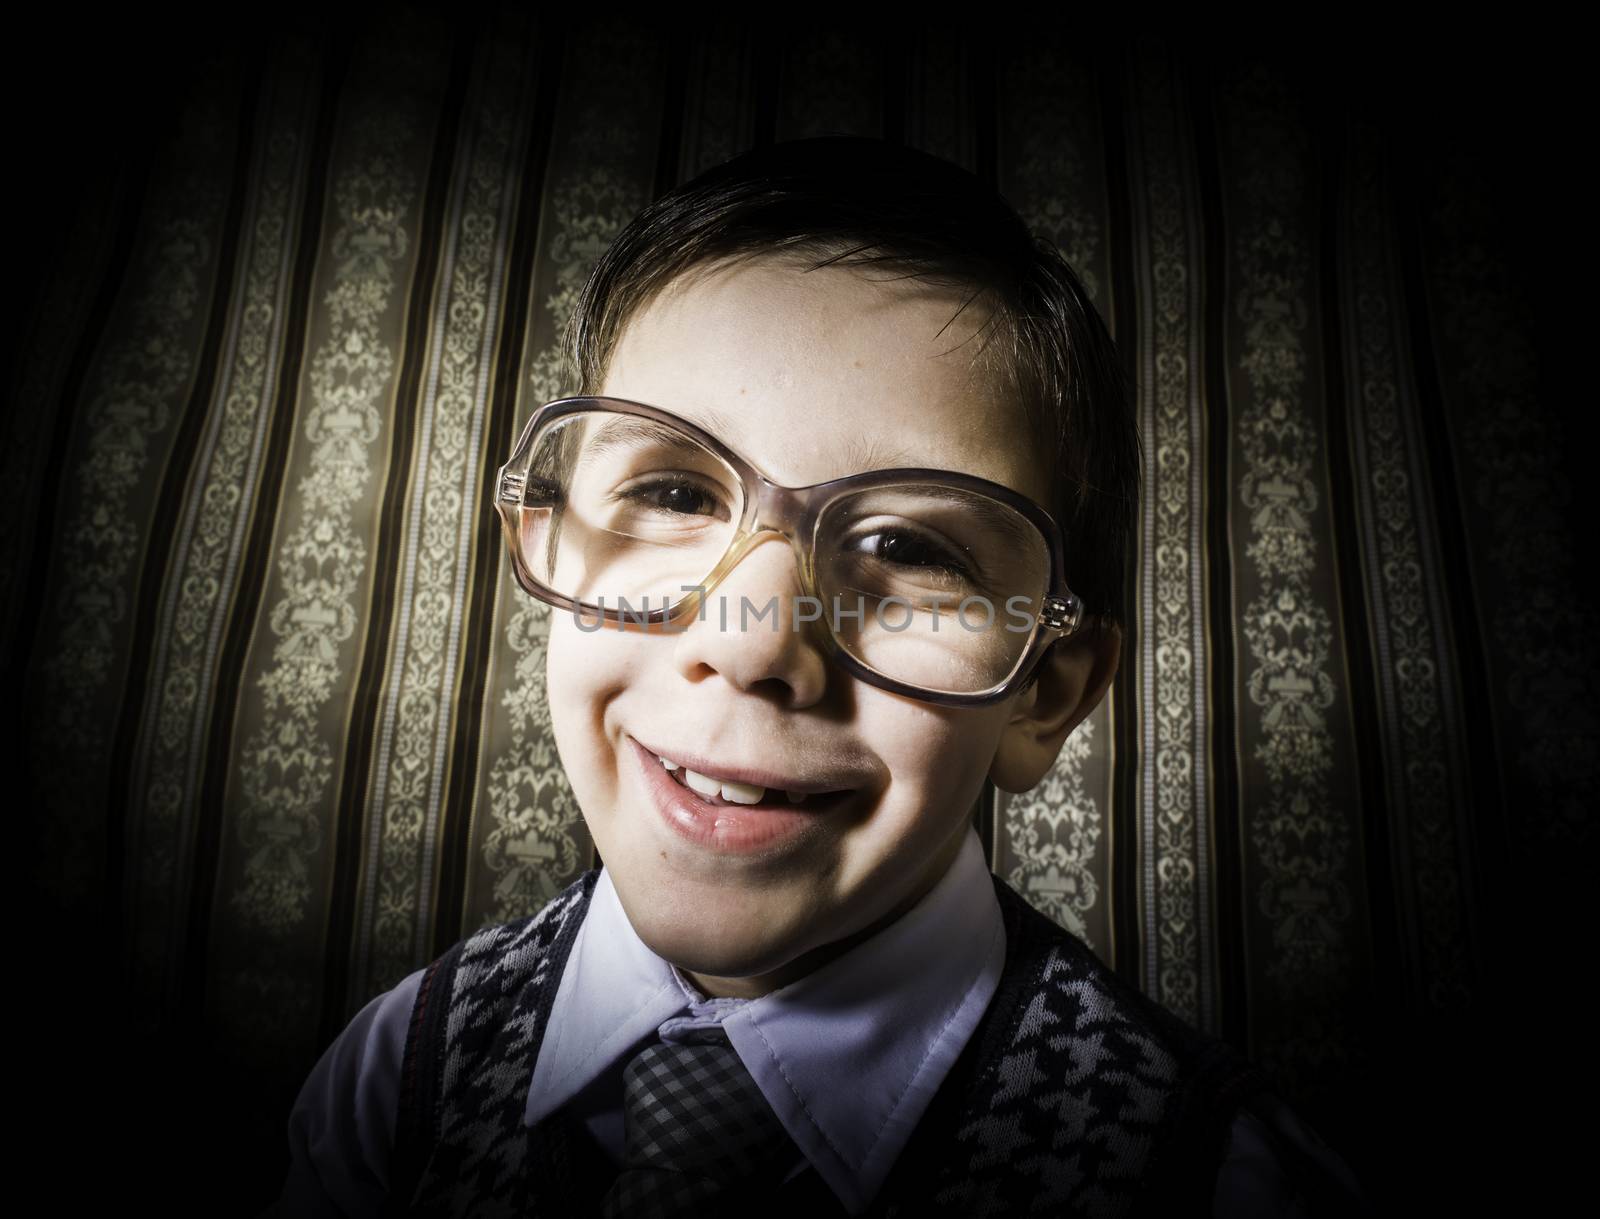 Smiling child with glasses in vintage clothes by deyan_georgiev